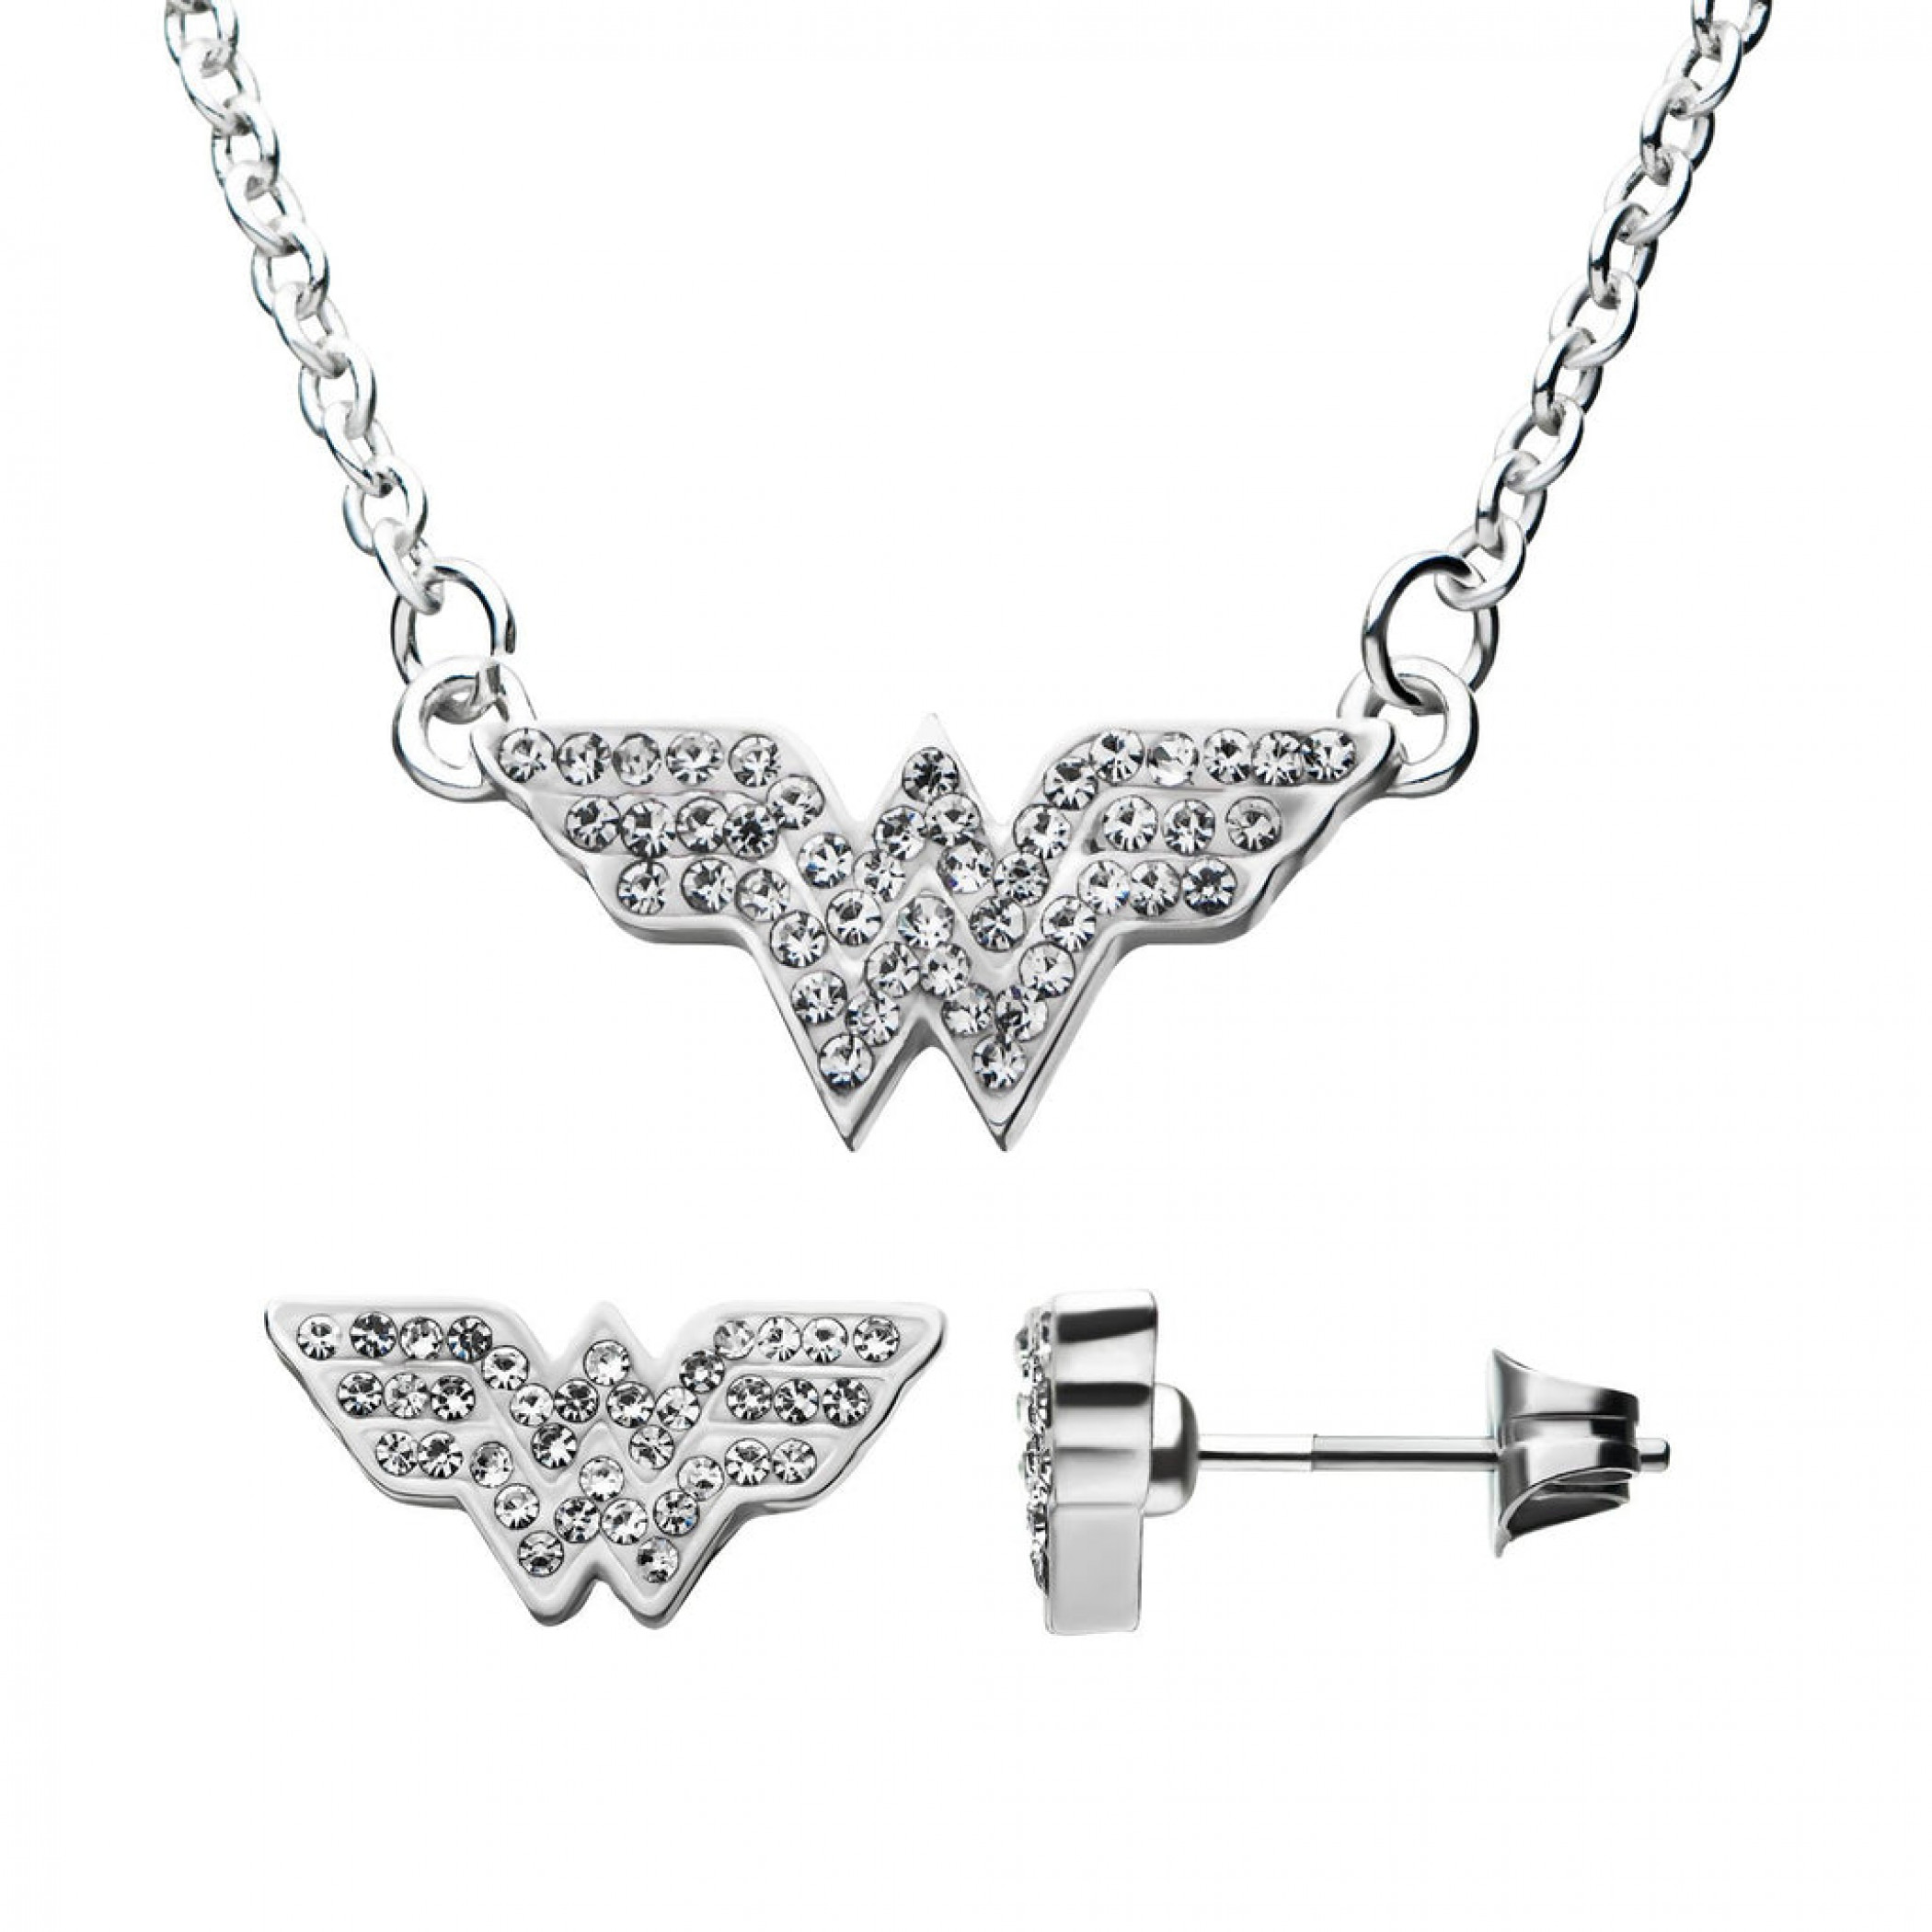 DC Comics Wonder Woman Symbol Studded Steel Necklace and Earring Set